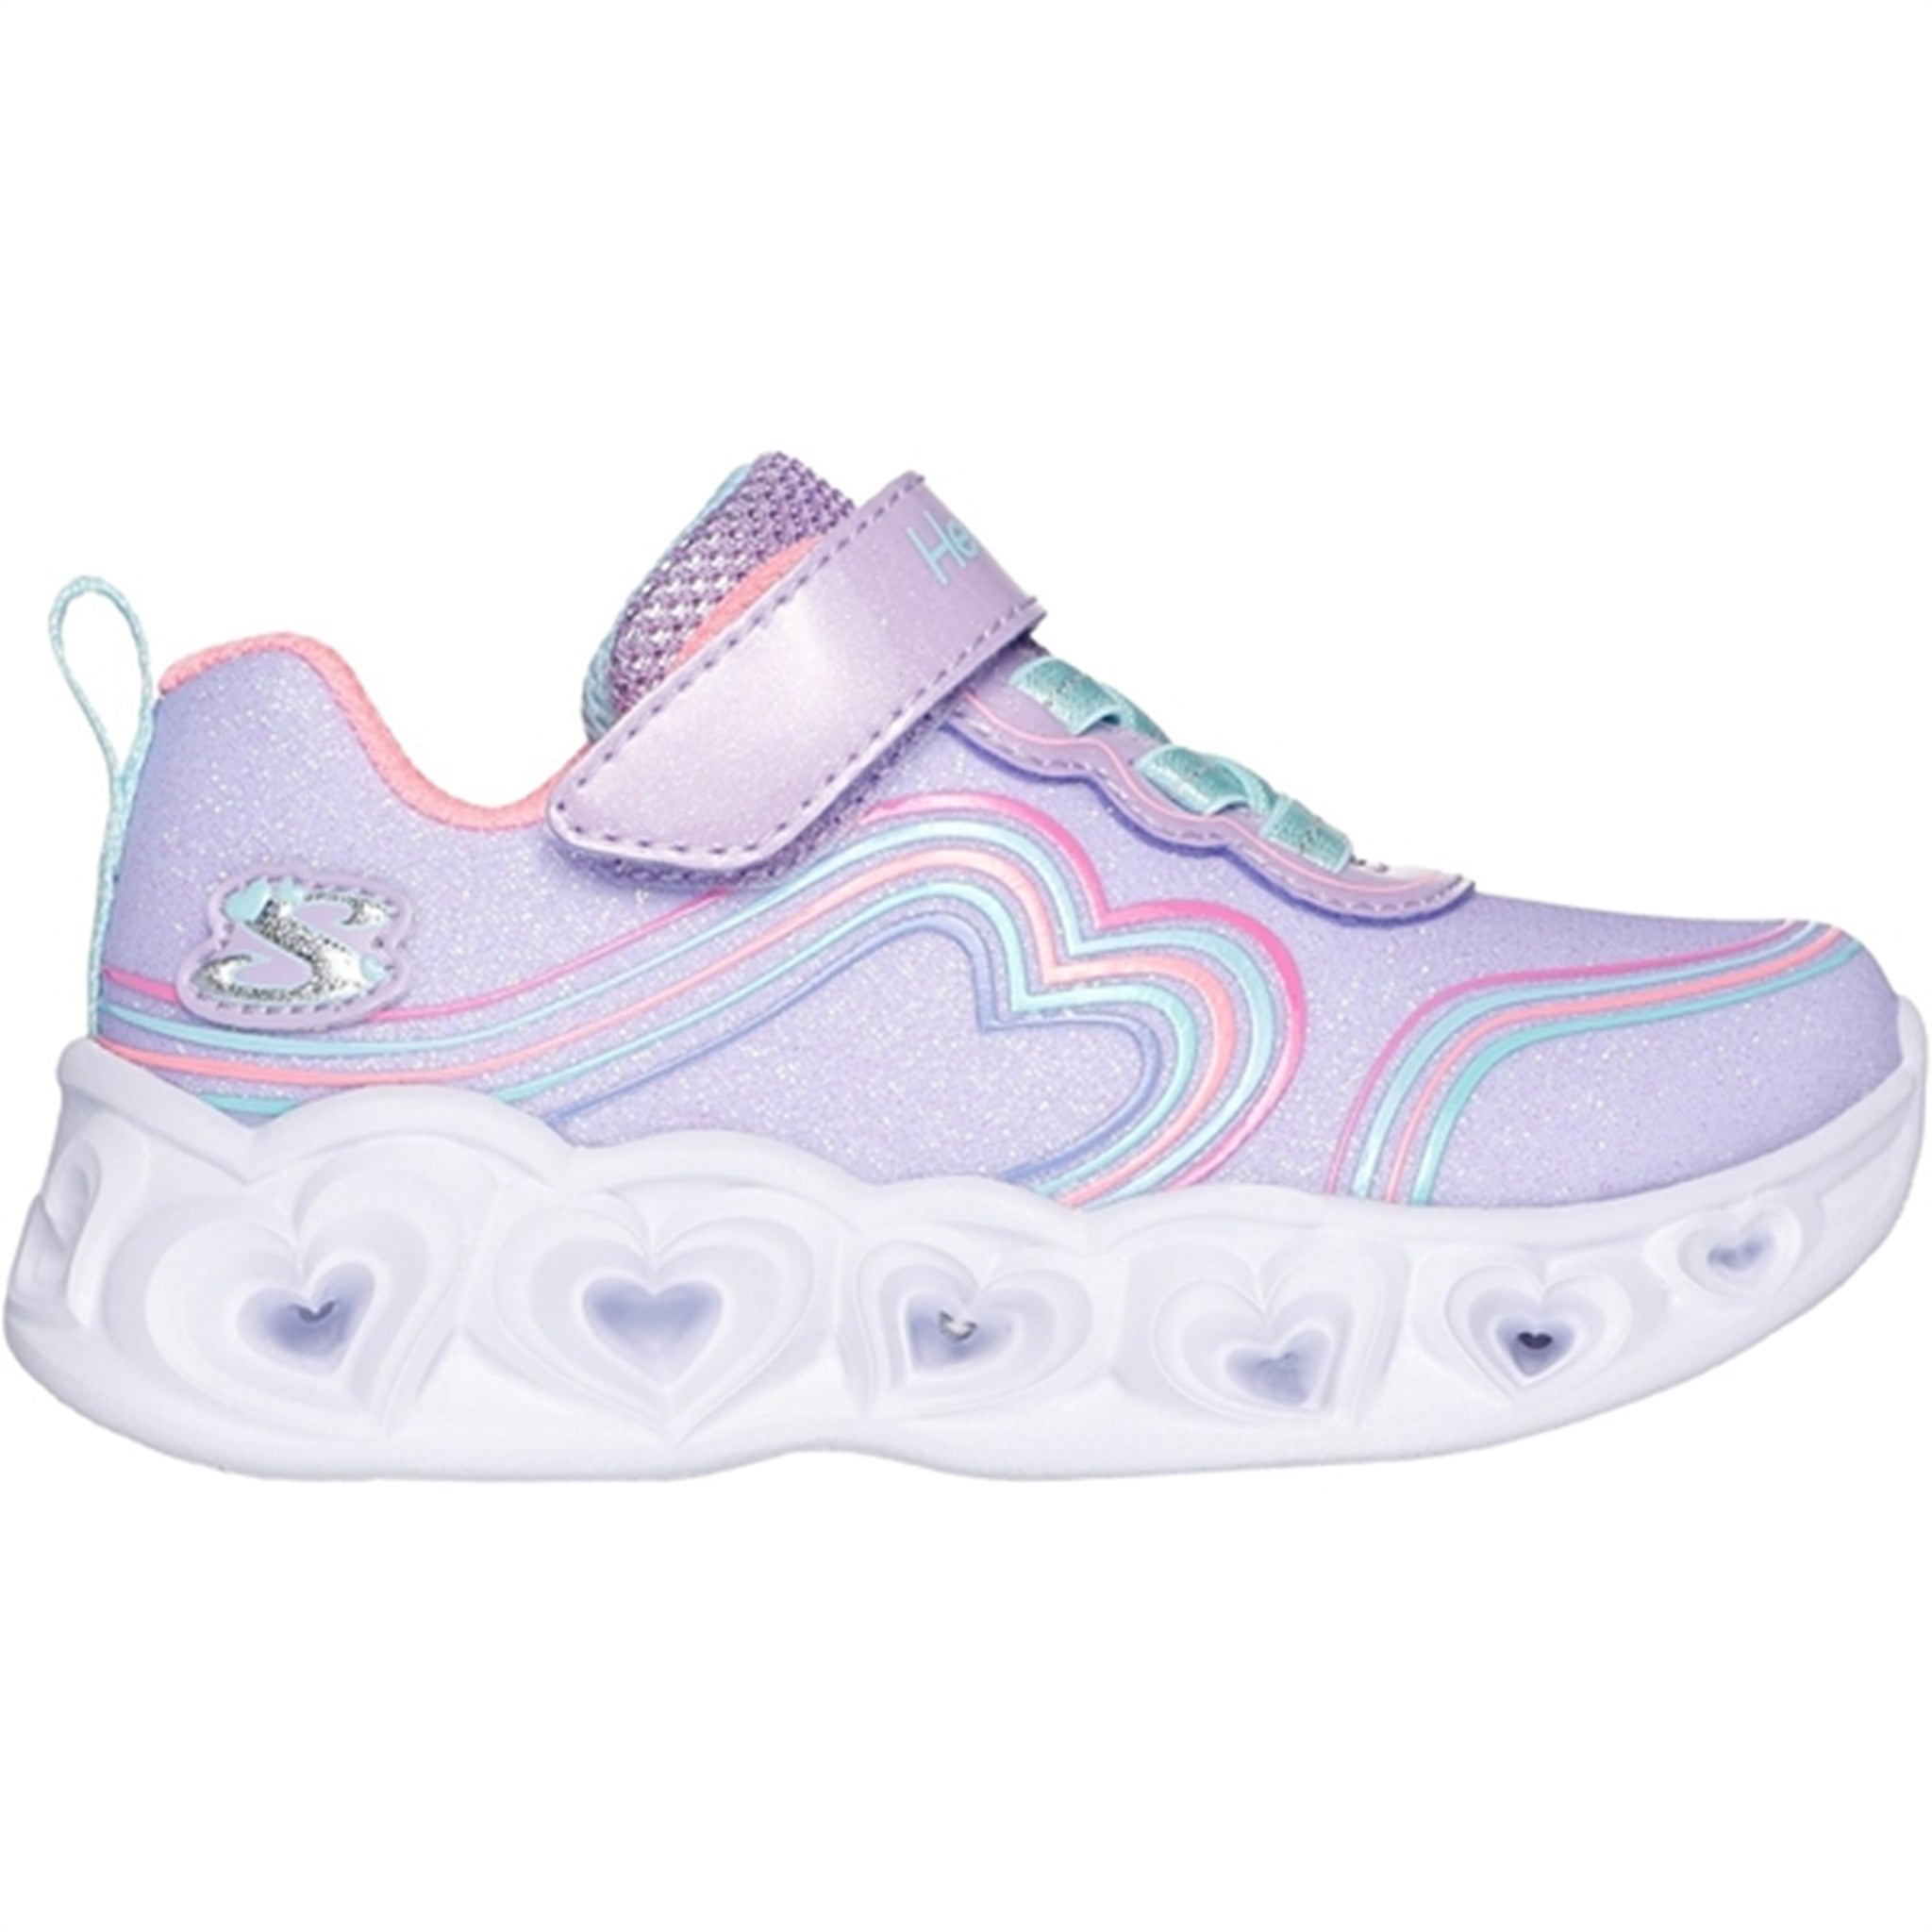 Skechers Lighted Hearts Sparkle Sneakers Lavender Multicolor 3